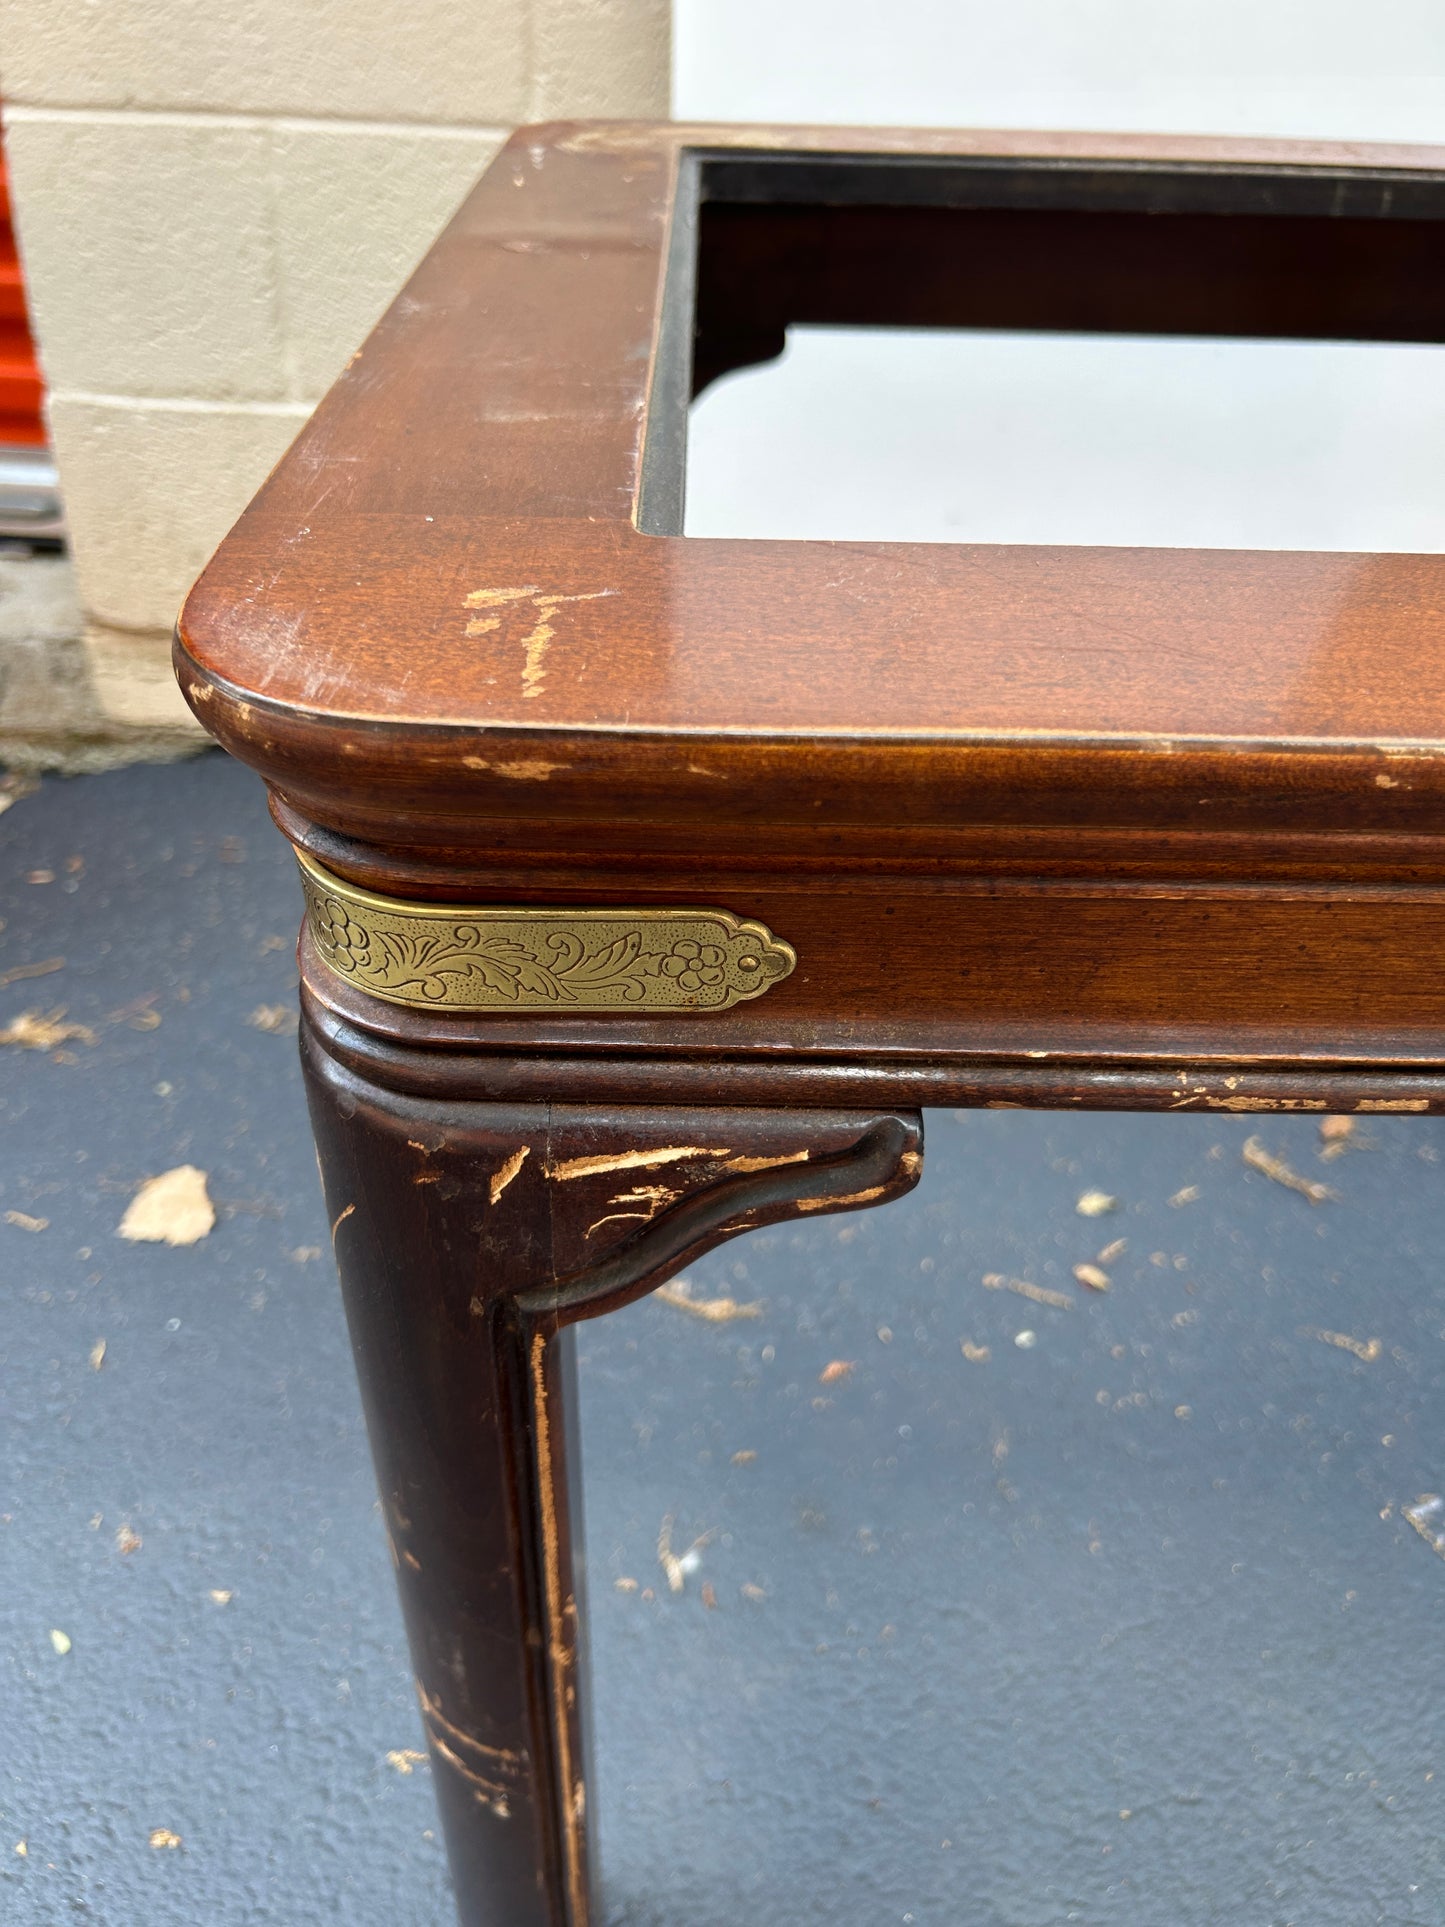 Vintage Ming-Legged Opium Style End Table with Decorative Metal Corner Details